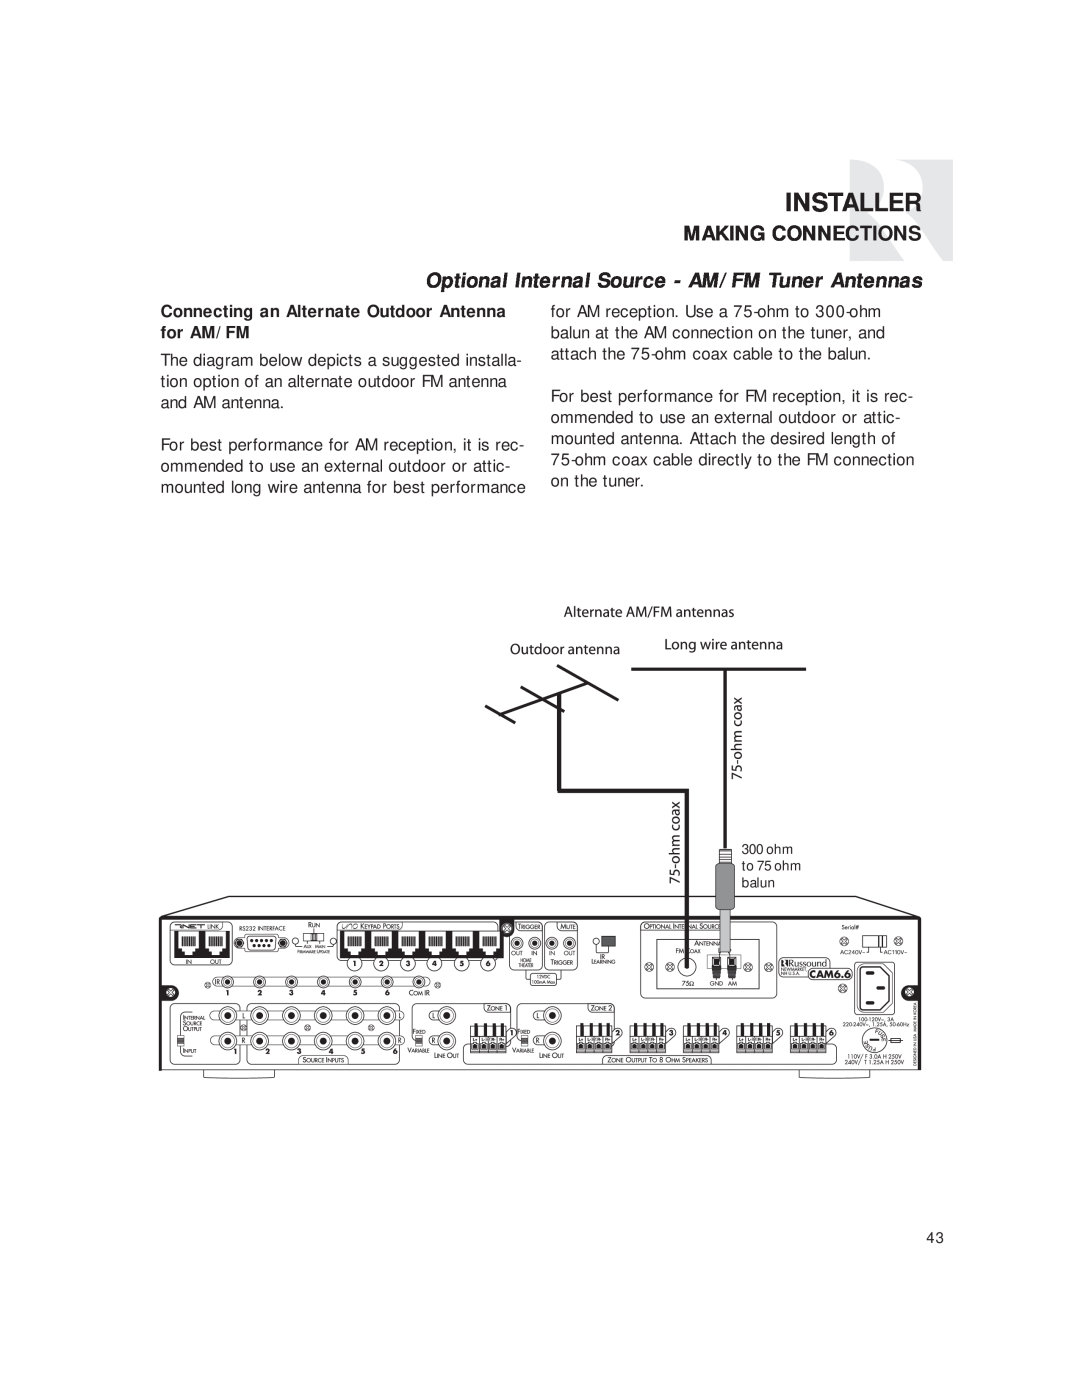 Russound CAM6.6T instruction manual Connecting an Alternate Outdoor Antenna for AM/FM, Installer, Making Connections 